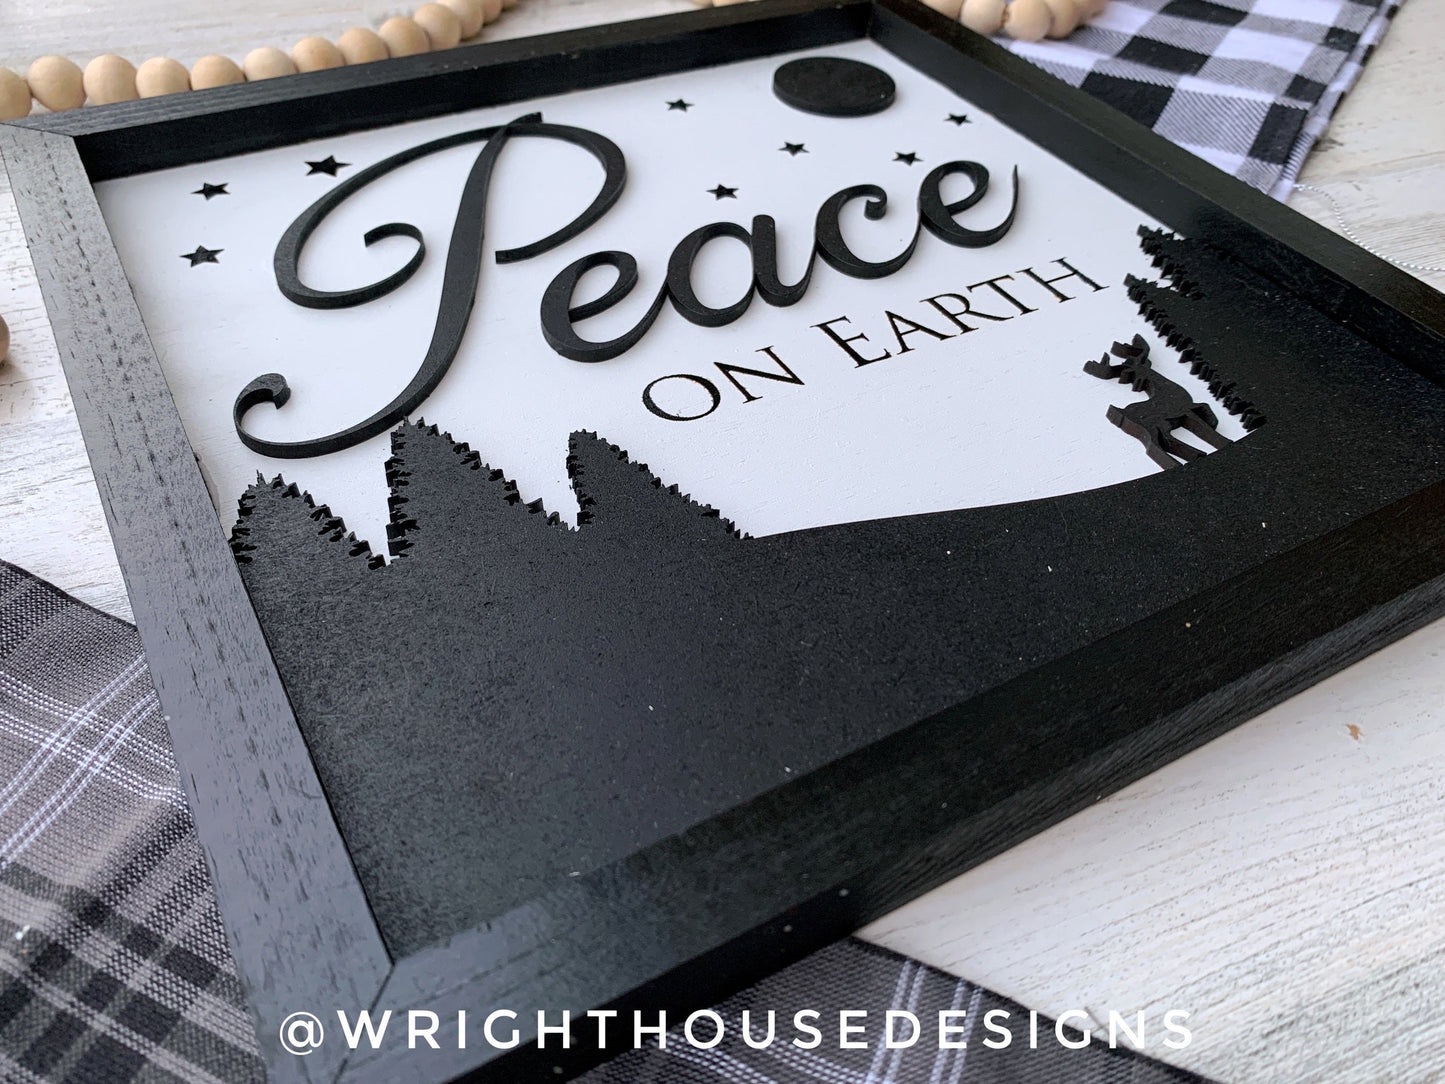 Peace On Earth - Christmas Coffee Bar Sign - Seasonal Home and Kitchen Decor - Handcrafted Wooden Framed Wall Art - Holiday Decorations